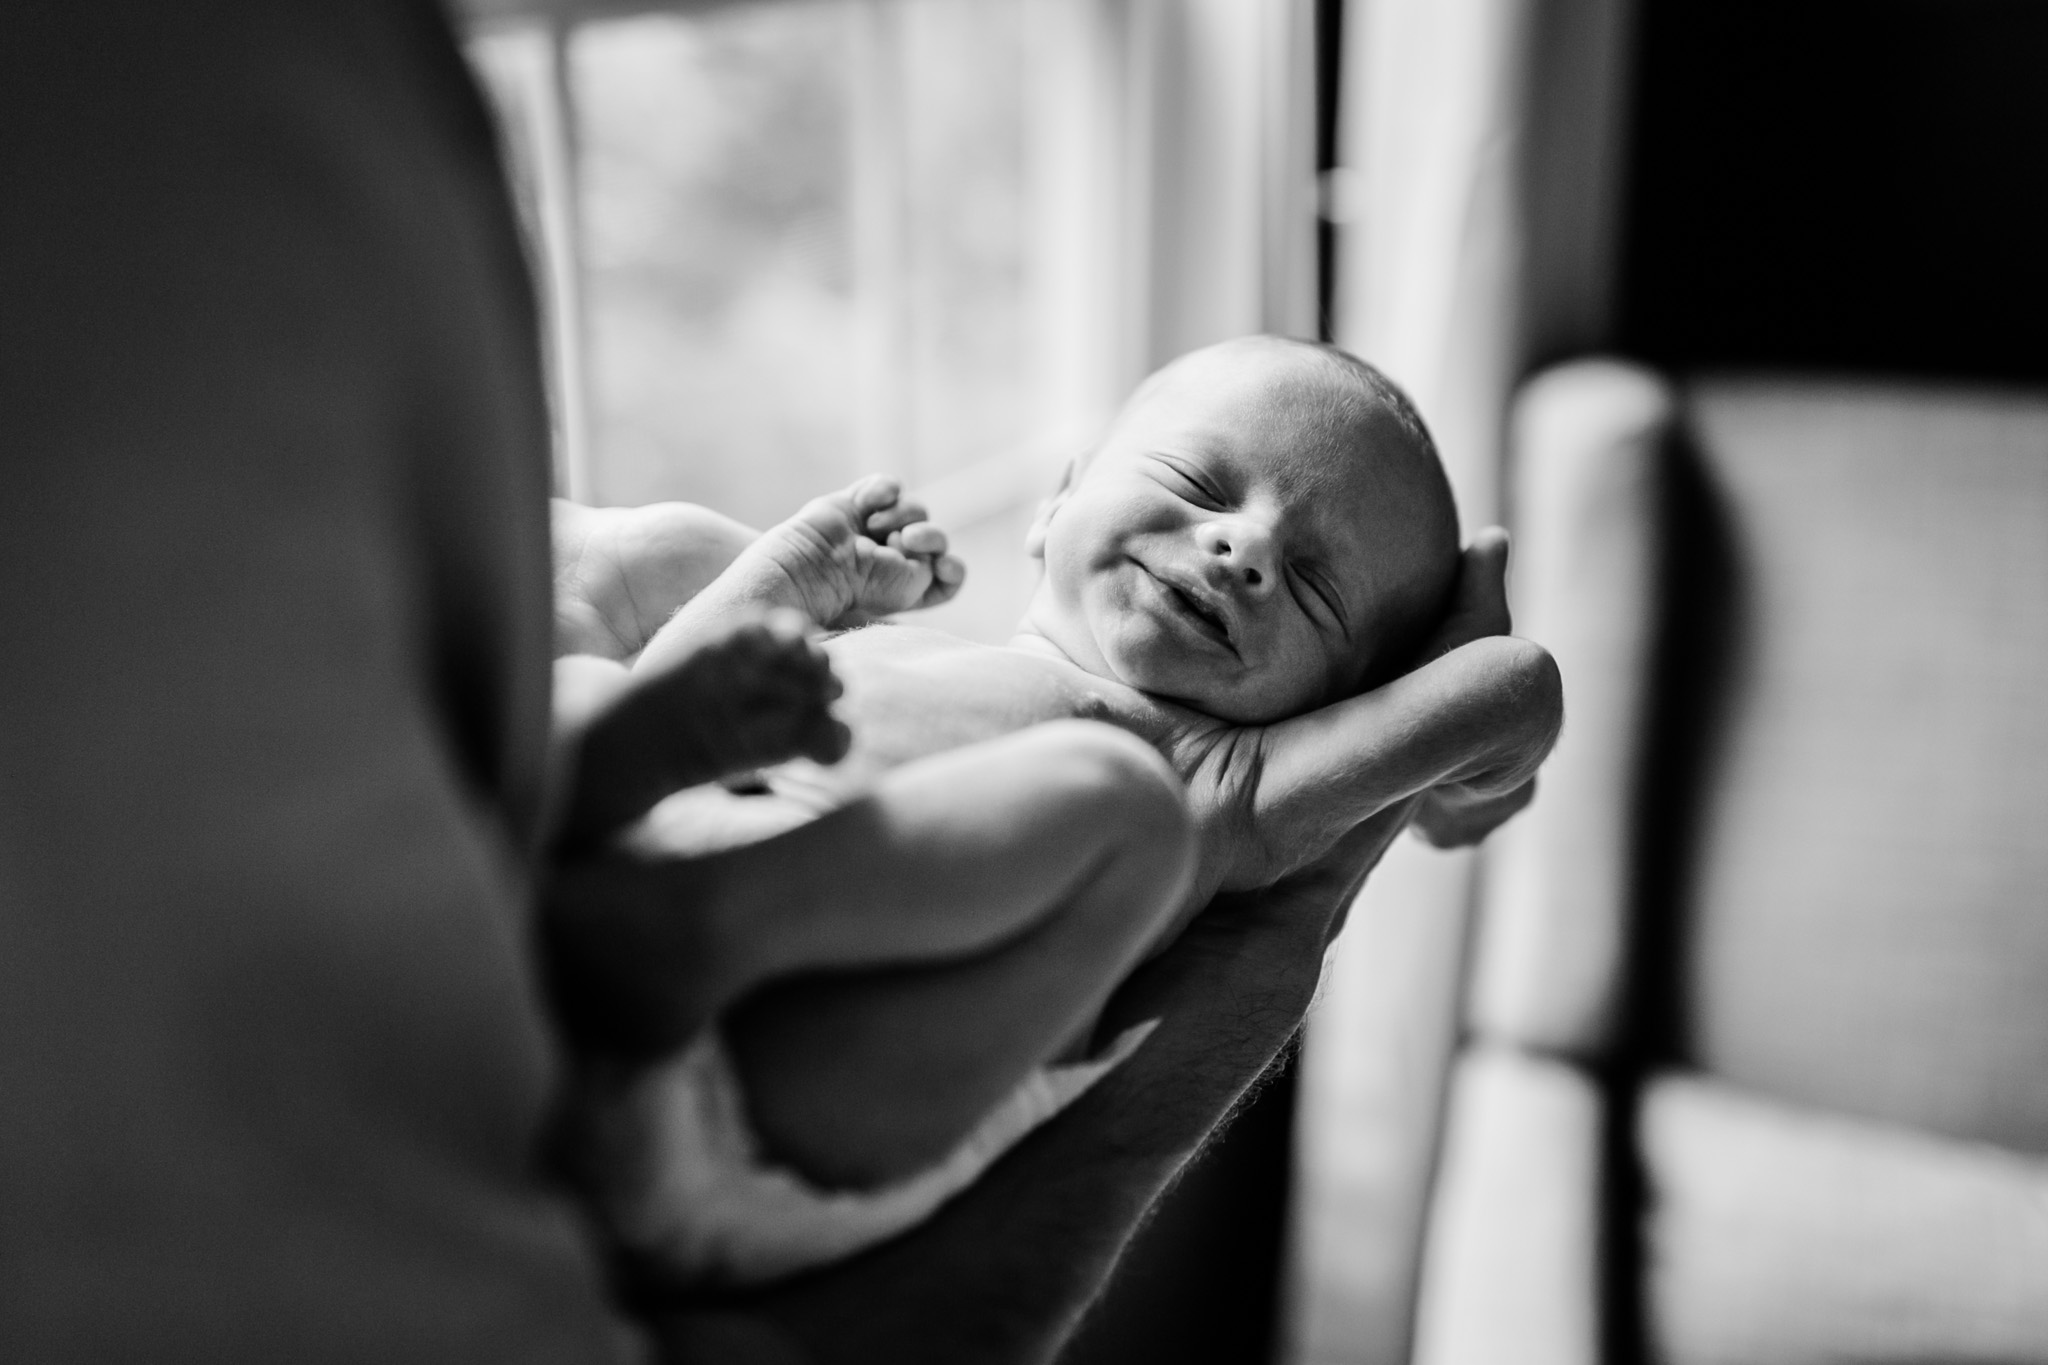 Durham Newborn Photographer | By G. Lin Photography | Lifestyle at home newborn photo shoot | Dad holding baby in hands standing by window